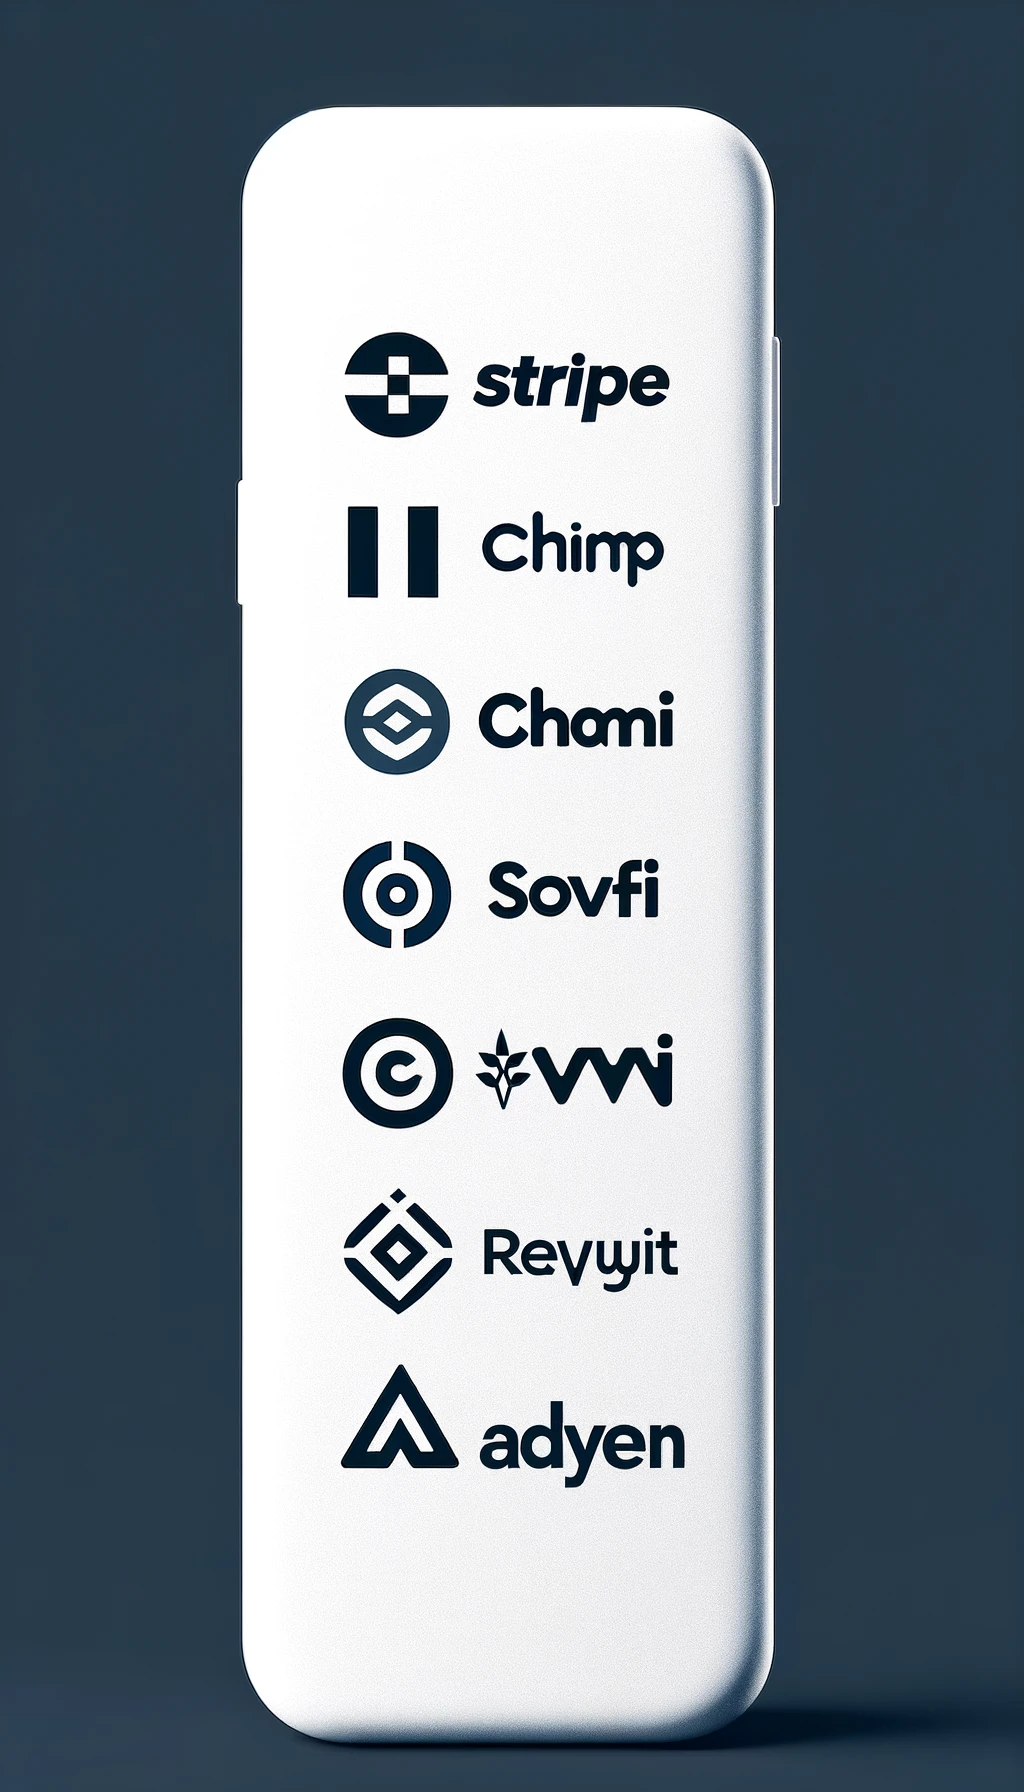 DALL·E 2024-02-21 00.42.15 - Create a minimalistic tall graphic banner featuring only the logos of the top fintech companies in a column, including Stripe, Chime, SoFi, Revolut, a